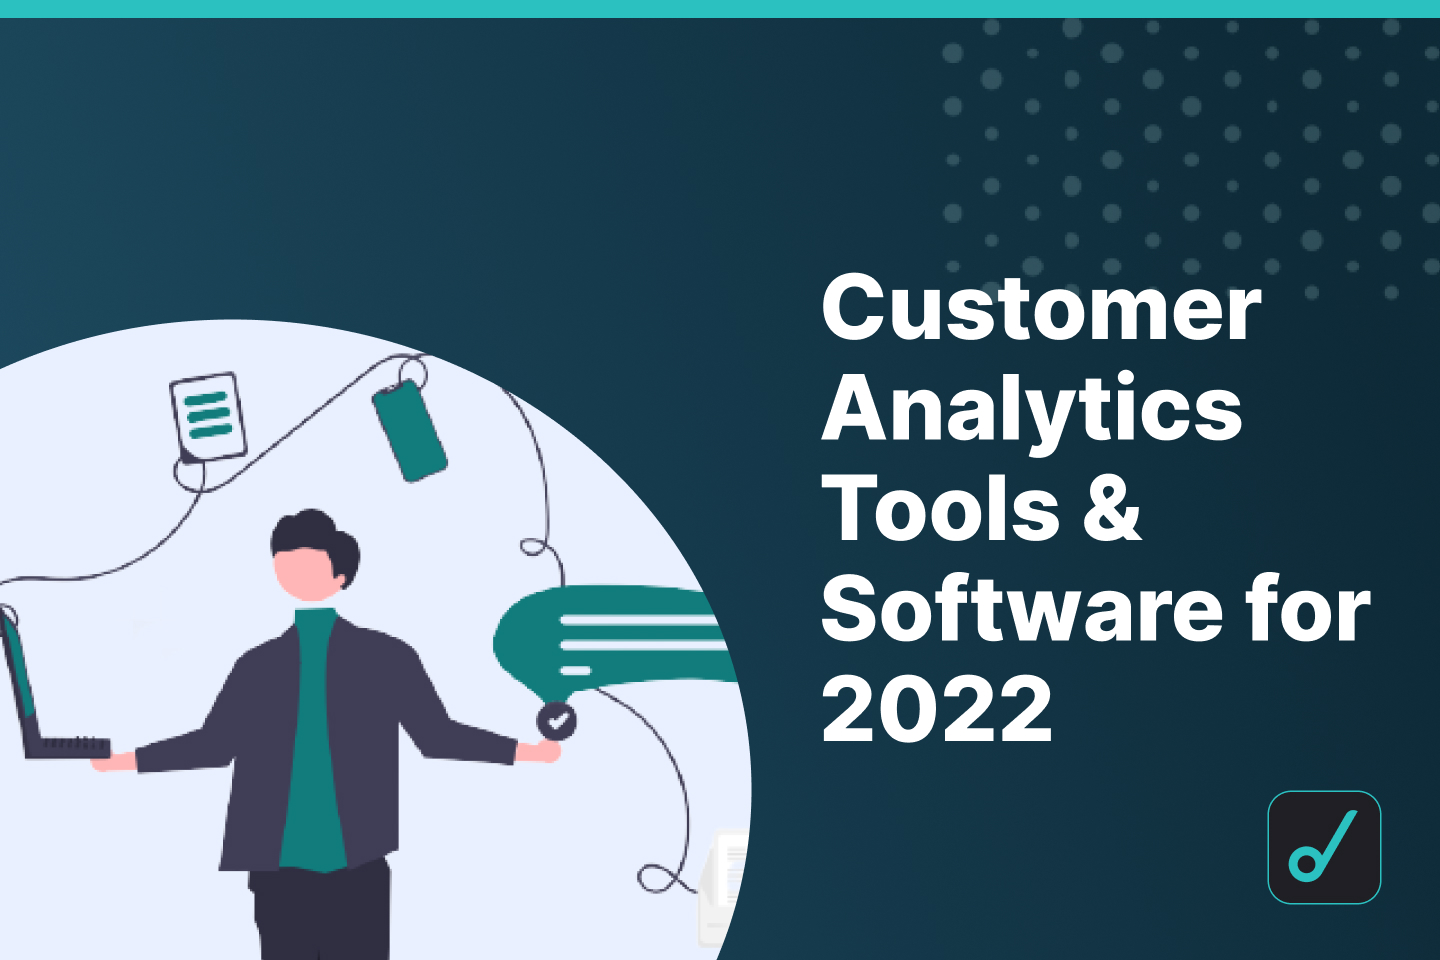 Top 9 Customer Analytics Tools & Software for 2022